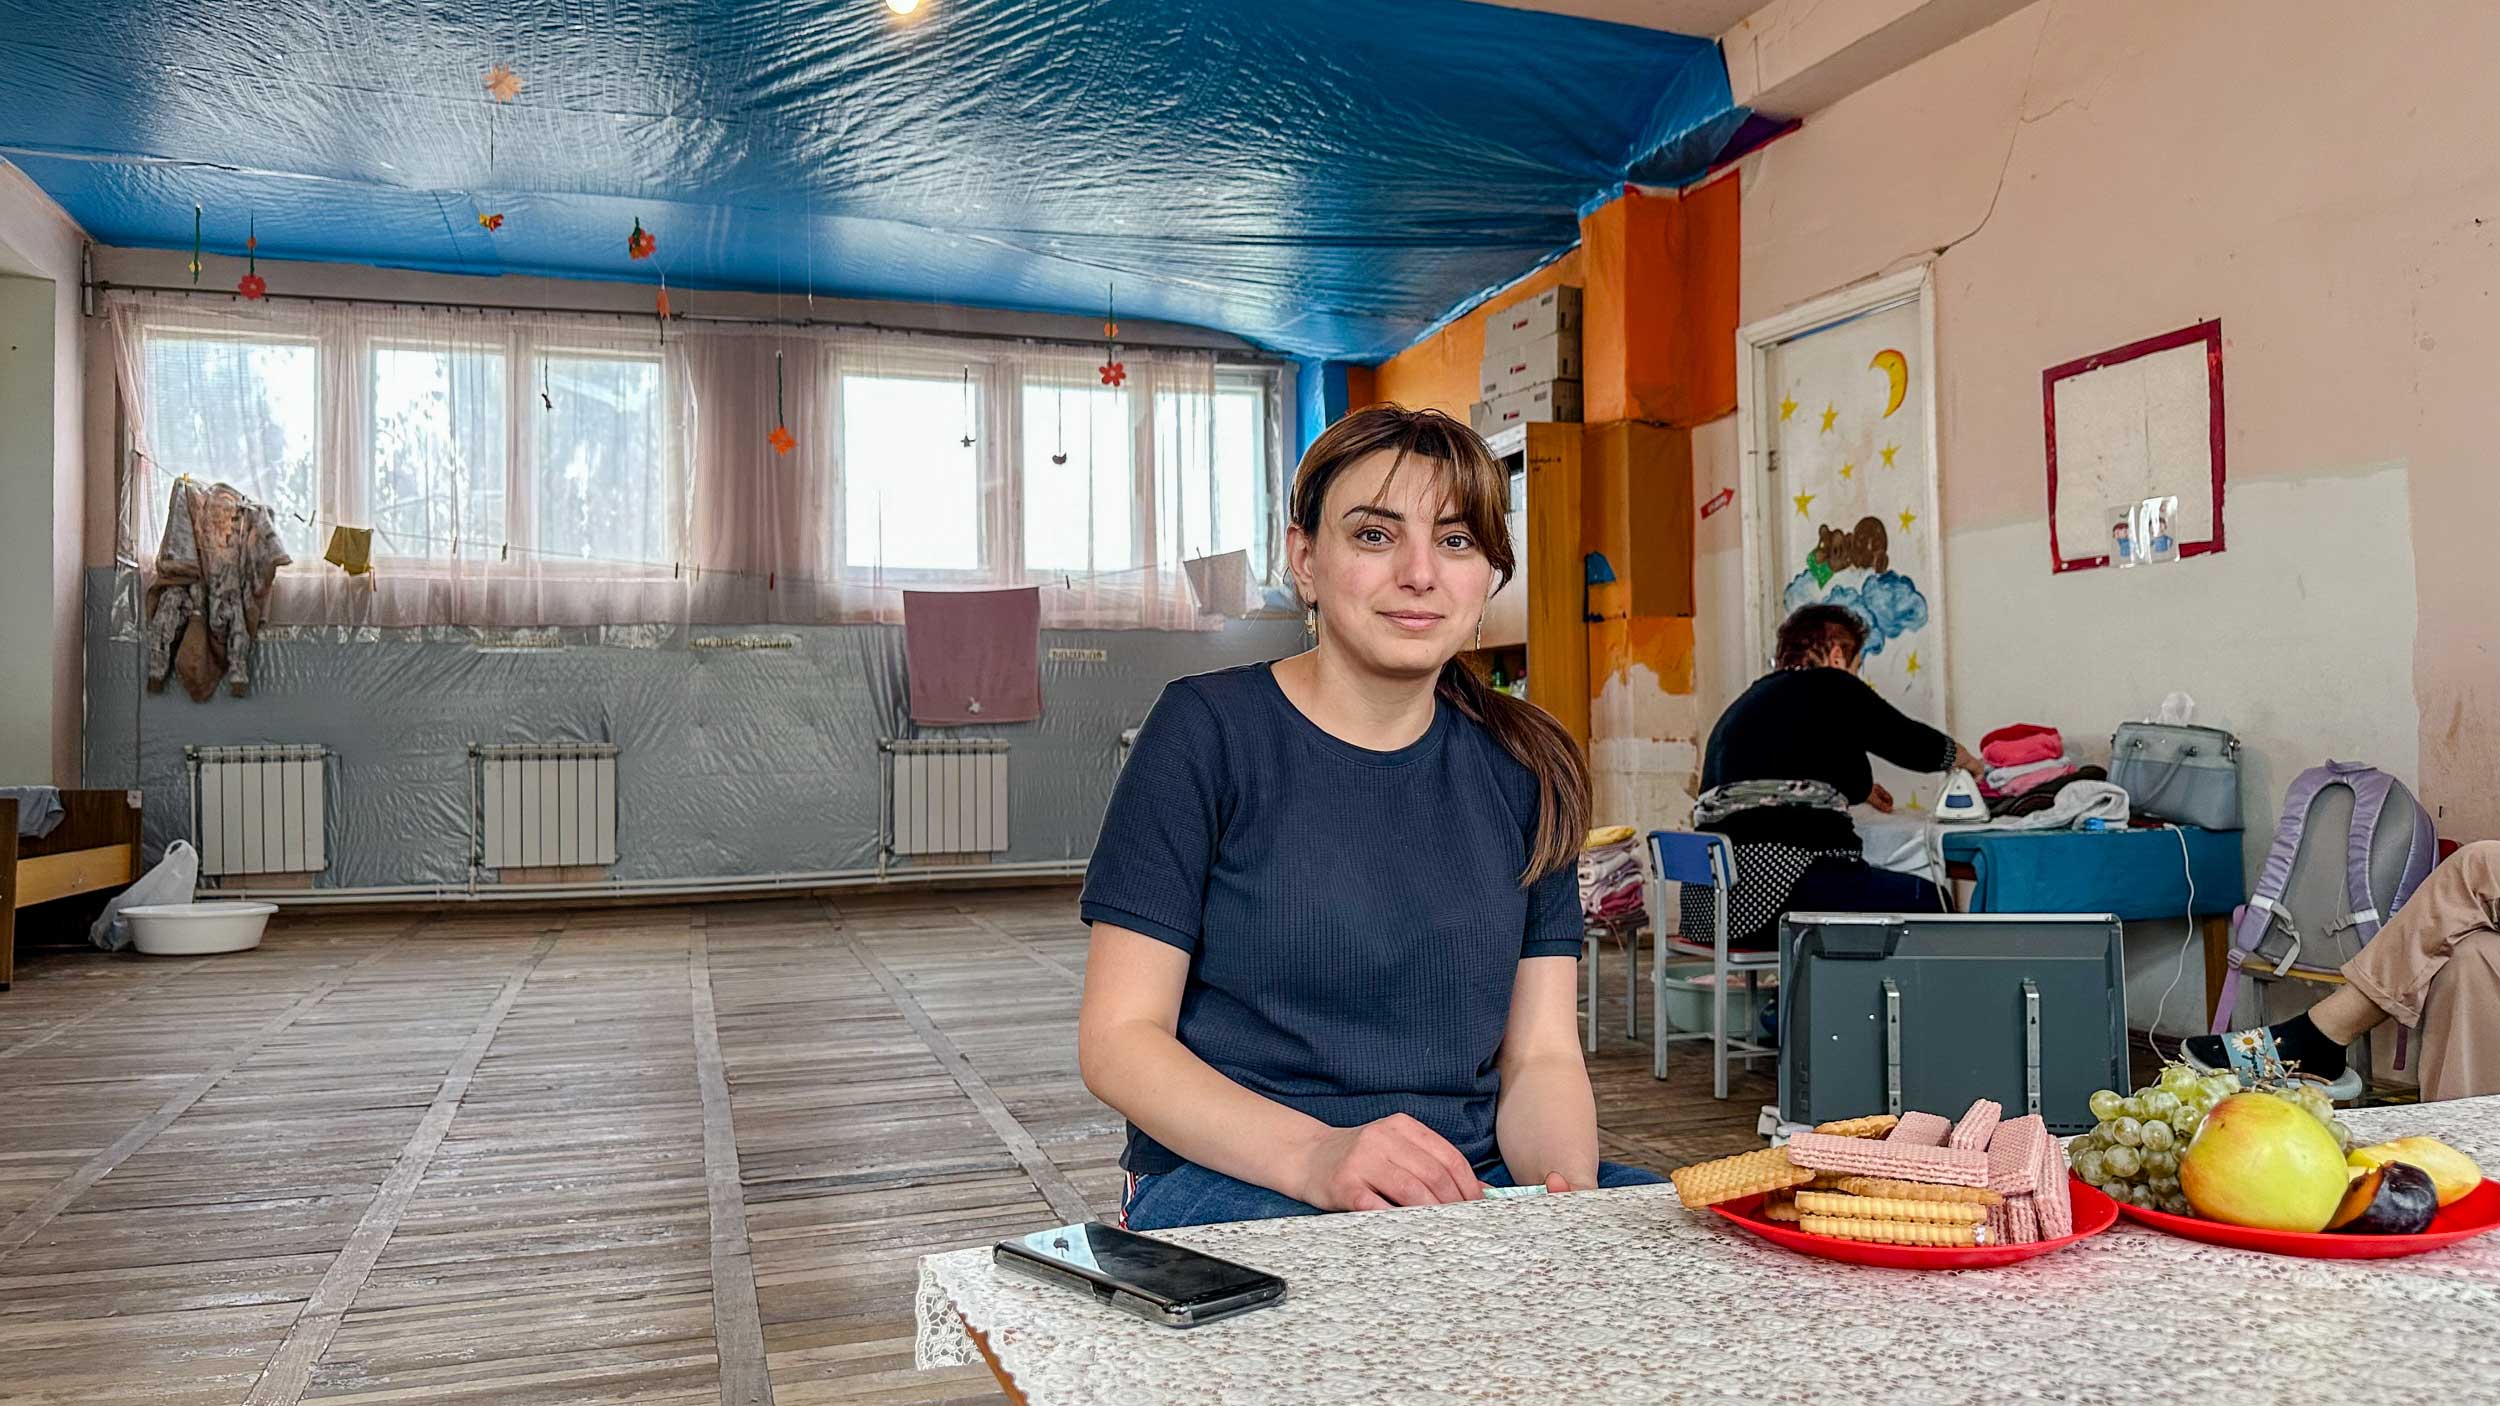 Hermine Hayrapetyan, 35, says she does not have concrete plans for the future. “We still struggle to grasp the full extent of what has happened to us, we do not know what the future holds.” © Siranush Sargsyan